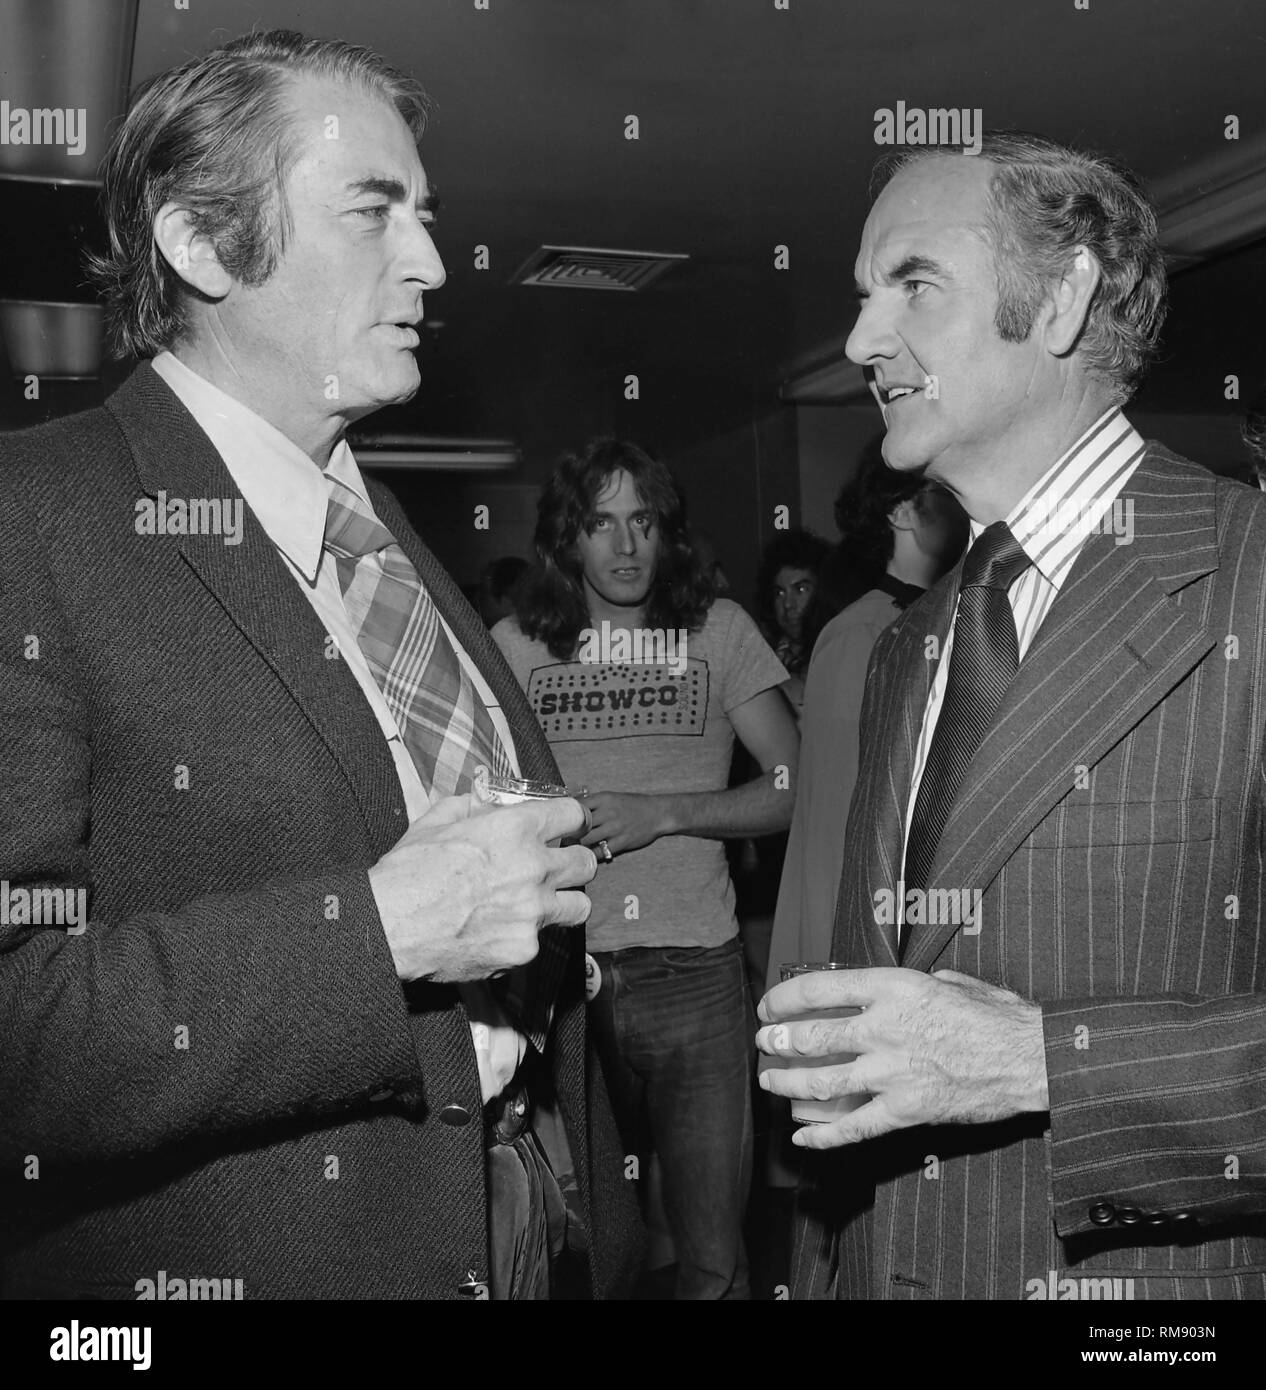 Actor Gregory Peck talks with Presidential candidate George McGovern before a fundraising concert in April 15, 1972 at The Forum in Los Angeles featuring Jame Taylor, Carole KIng, Barbra Streisand and Quincy Jones. Stock Photo